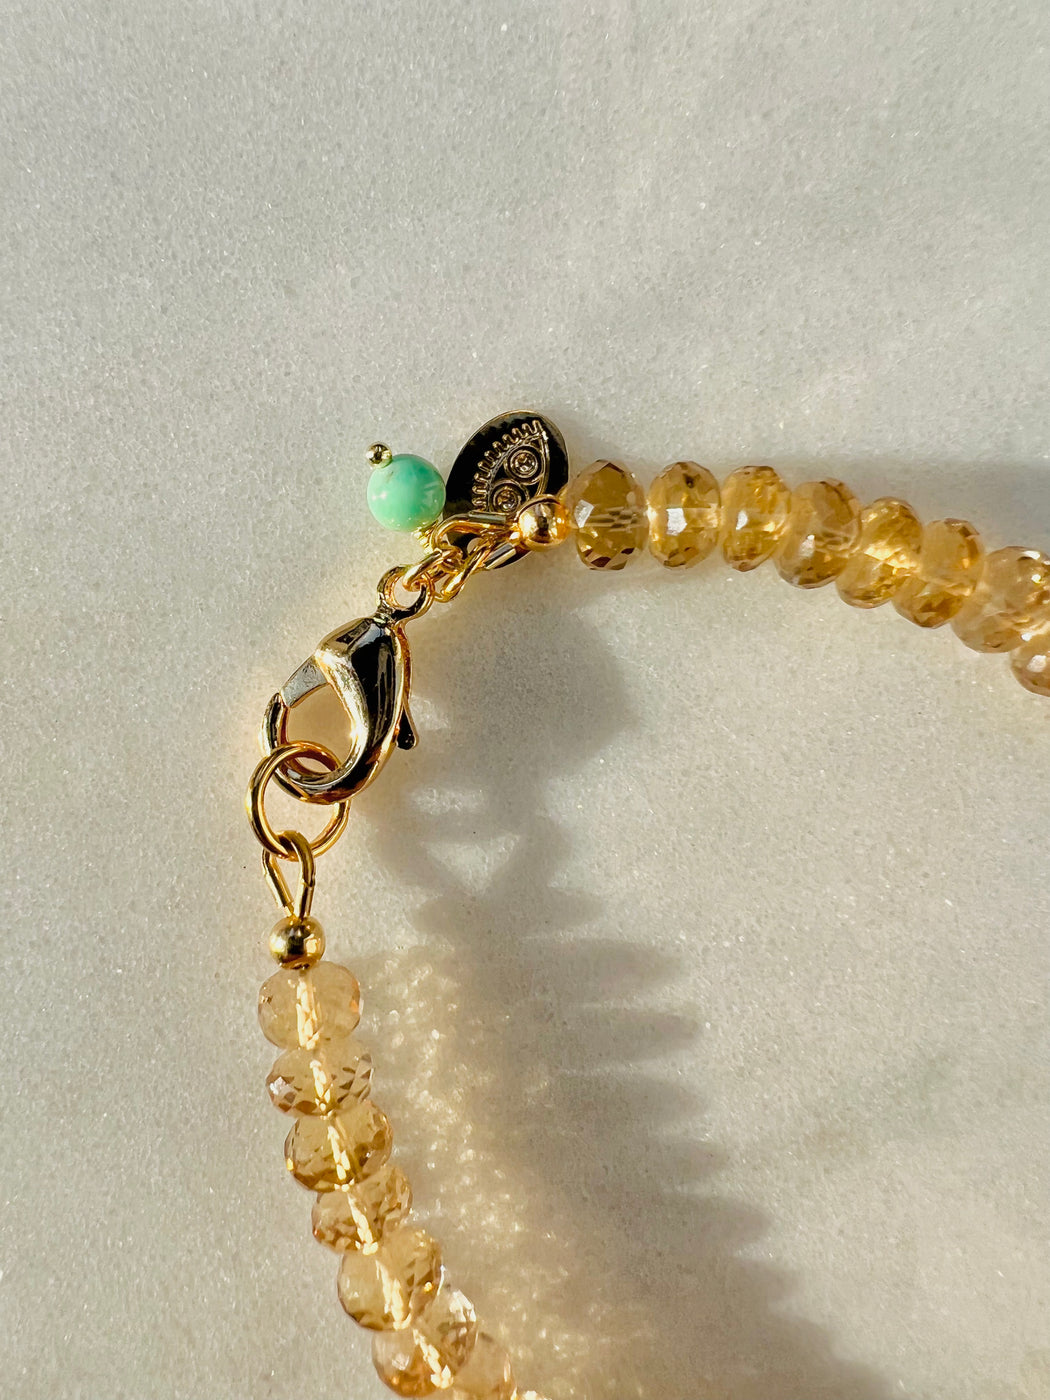 Faceted Champagne Quartz 7” Bracelet - Gold Fill clasp strung on coated gold wire.   Accented with Chrysoprase